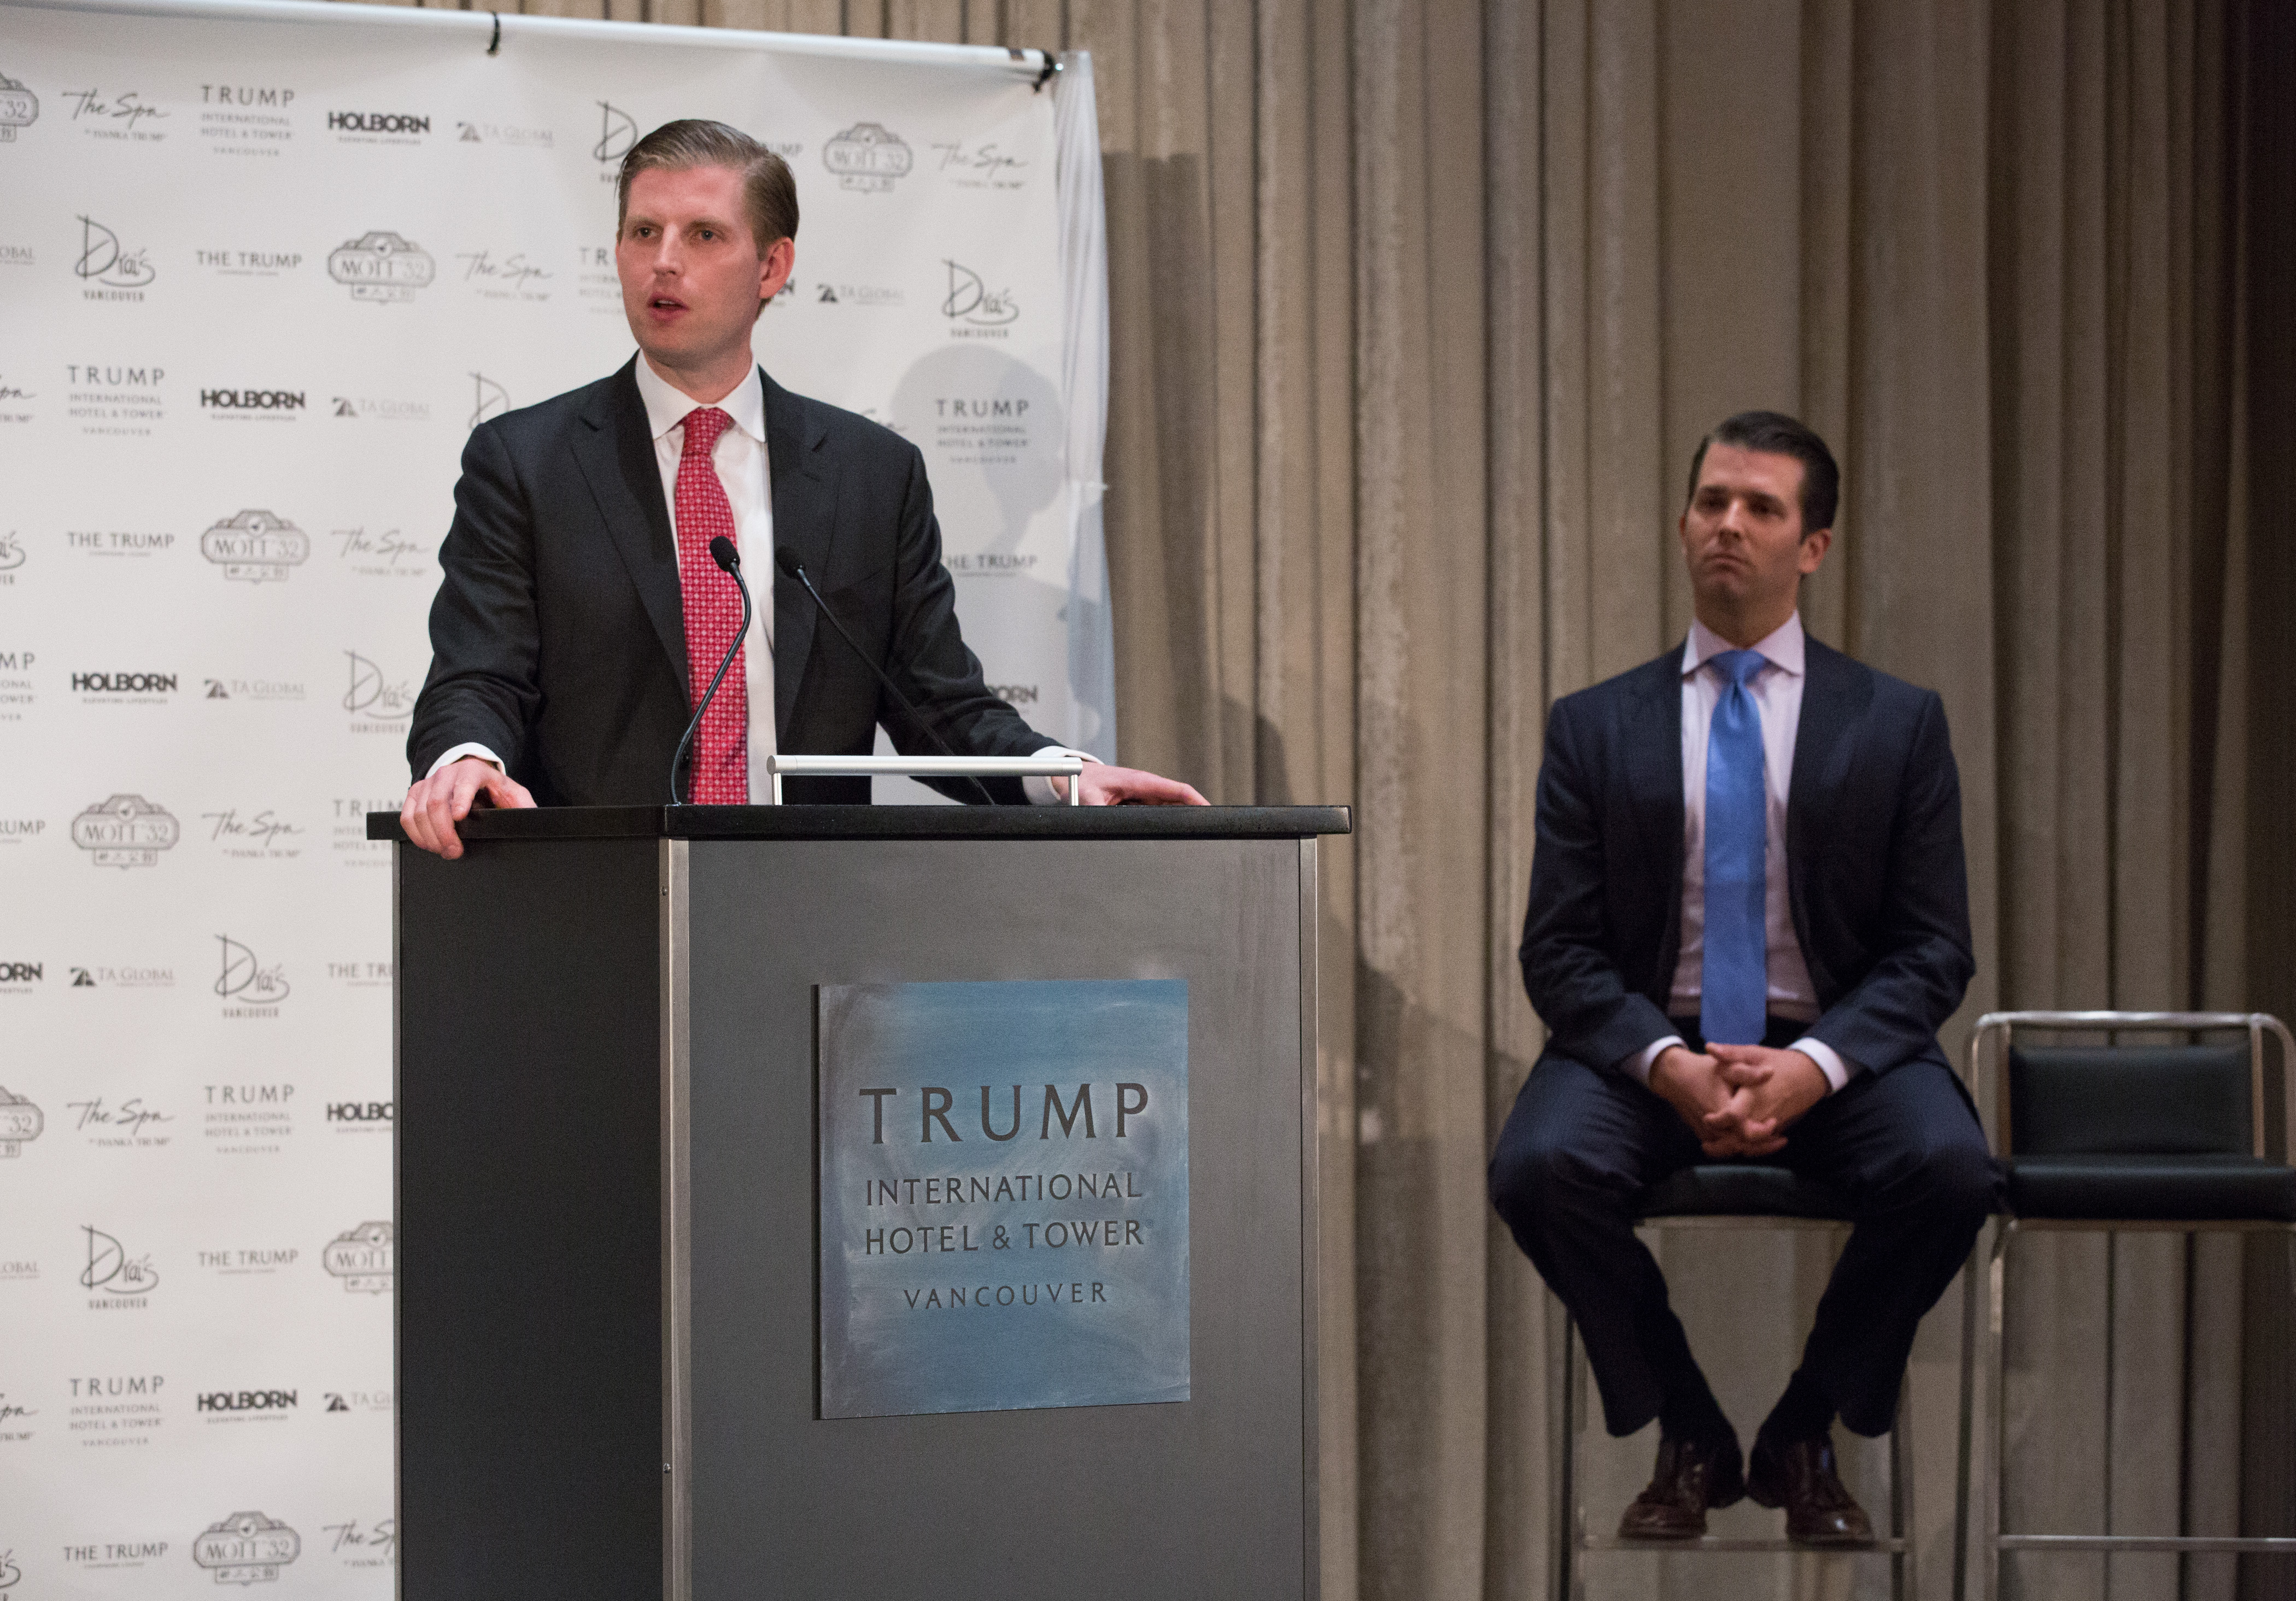 Eric Trump and  Don Trump Jr., Executive Vice Presidents  of Development and Acquisition and Development for the Trump Organization, attend the Trump International Hotel And Tower Vancouver Grand Opening on February 28, 2017 in Vancouver, Canada. (Phillip Chin—Getty Images for Trump Internati)